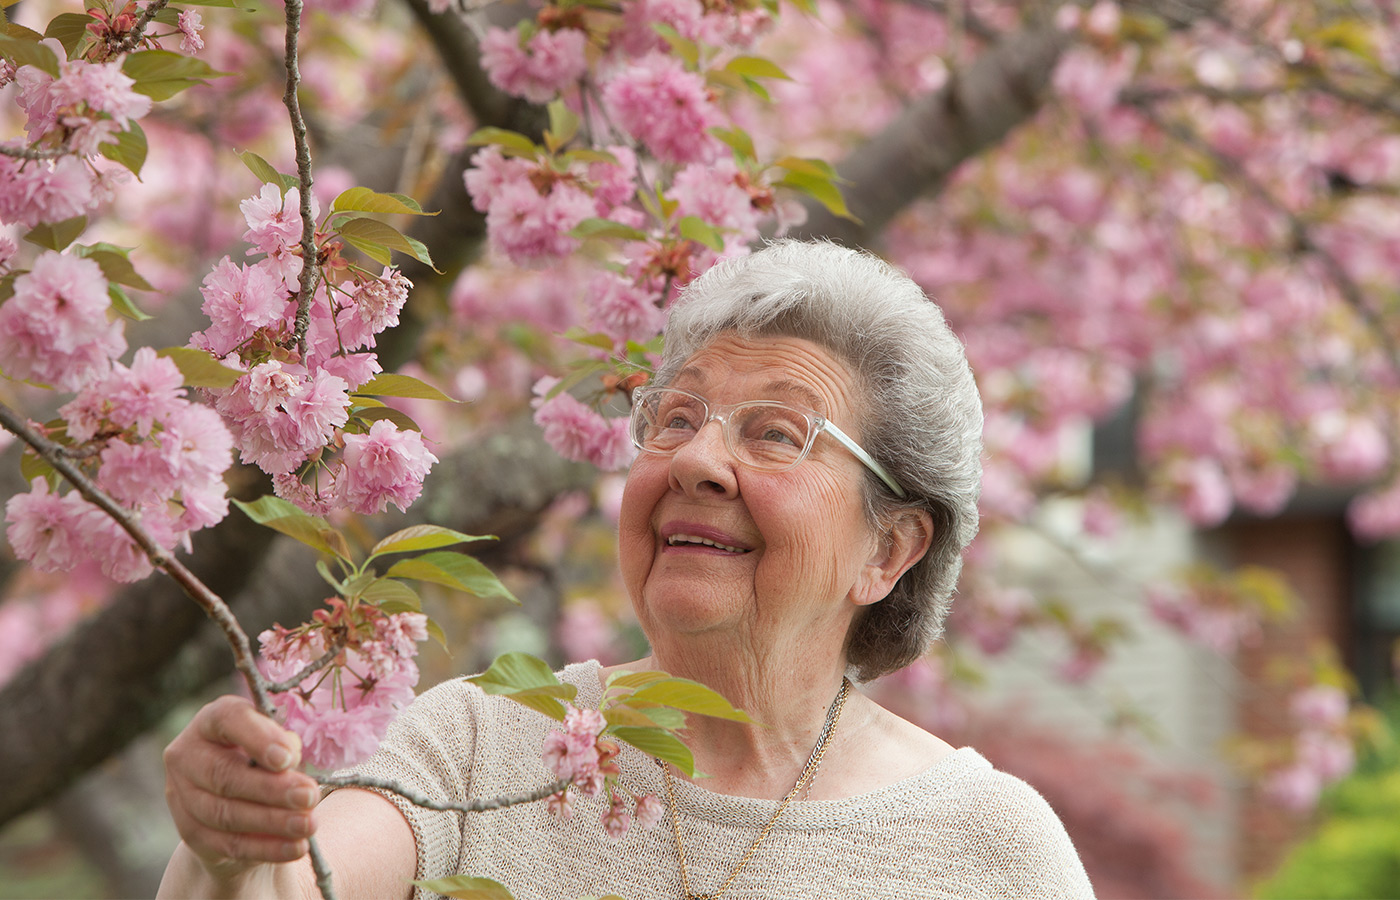 A resident is looking at cherry blossoms.